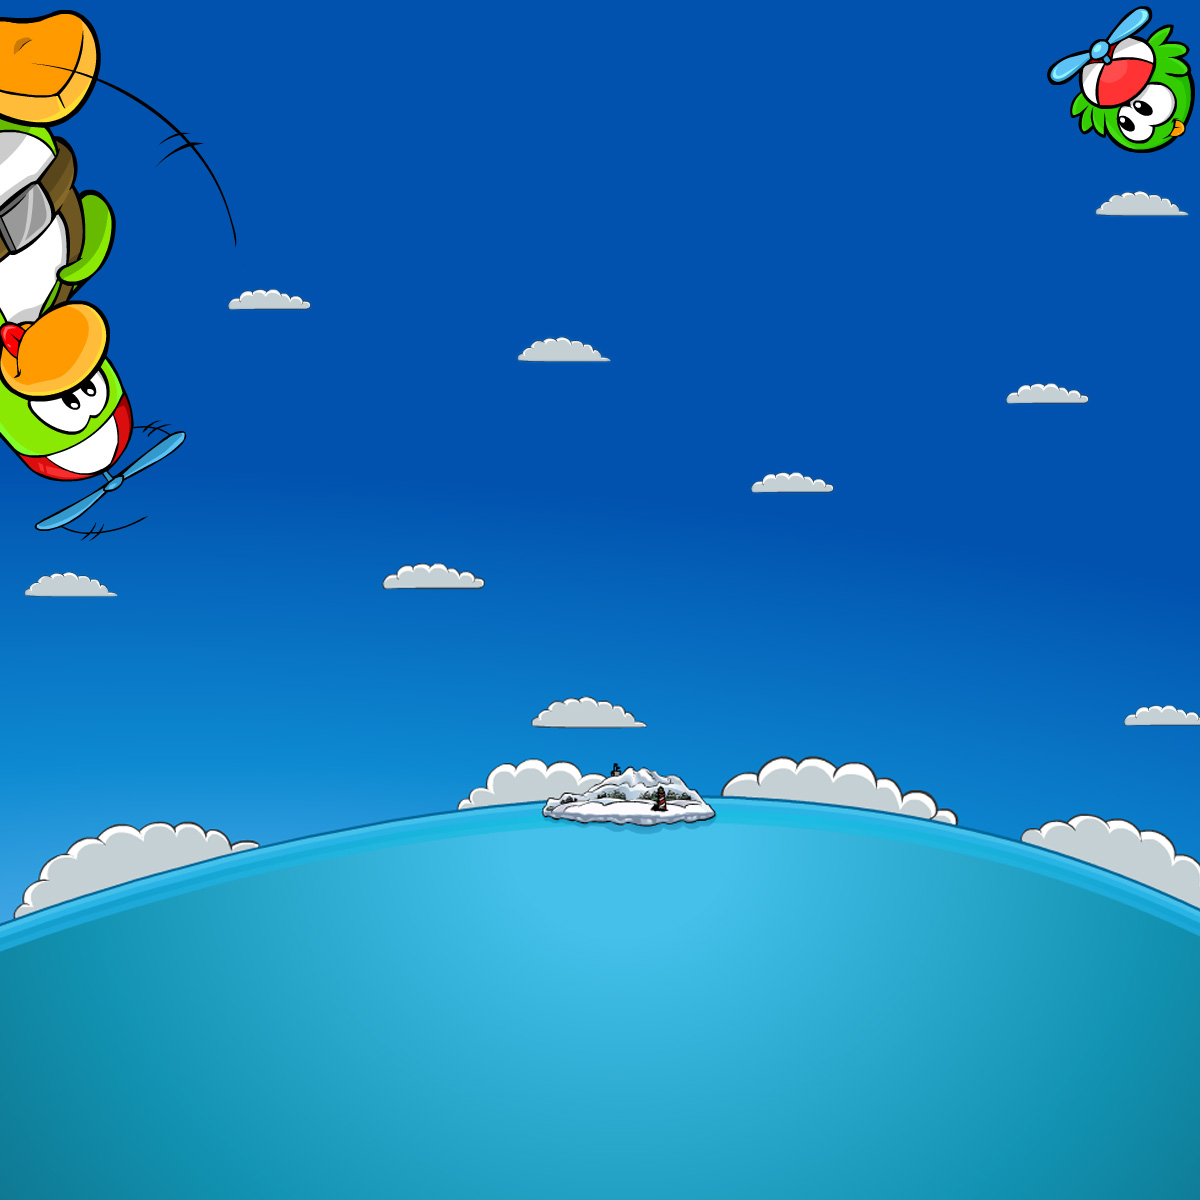 Club Penguin Wallpaper From Disneycouk . Club Penguin Wallpapers